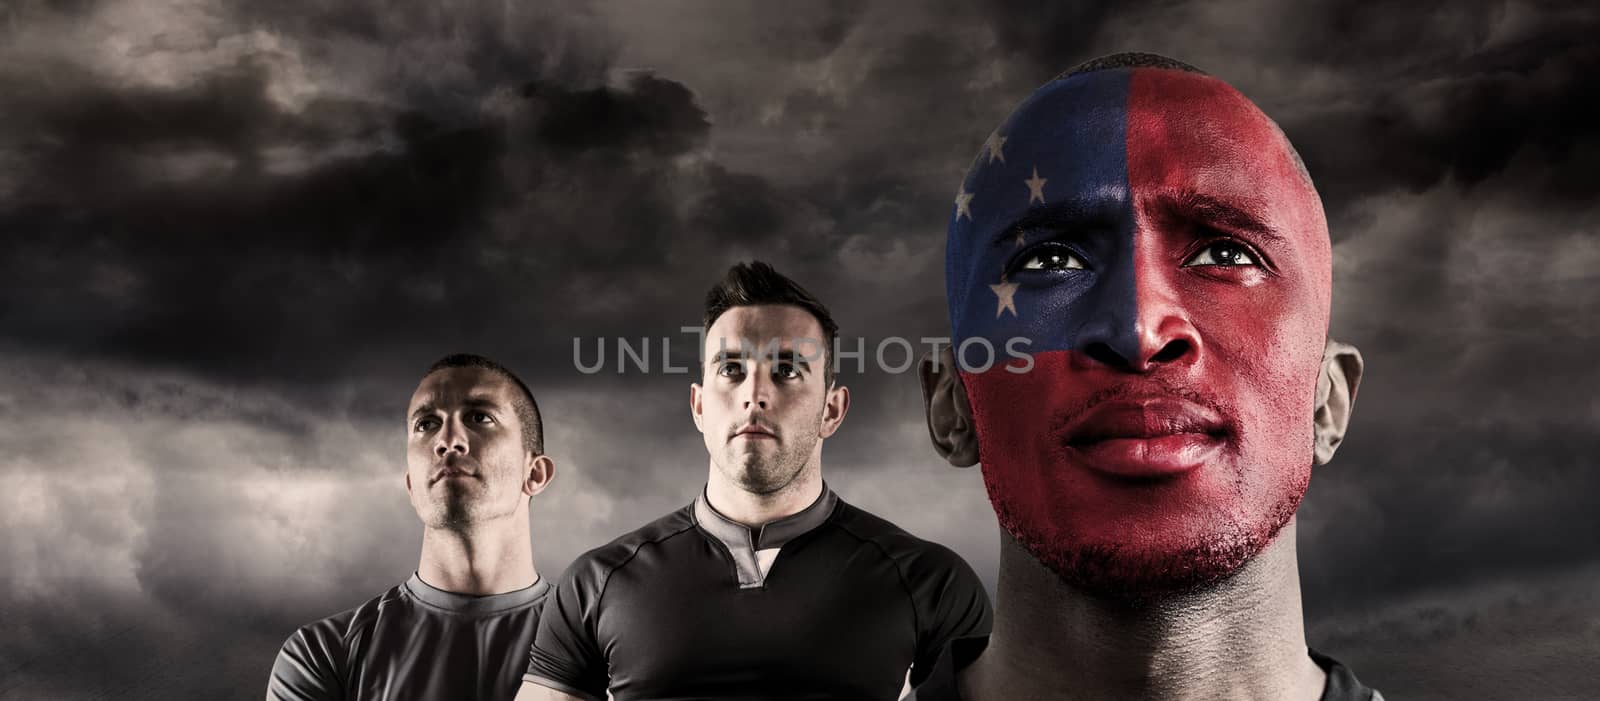 Composite image of samoan rugby player by Wavebreakmedia